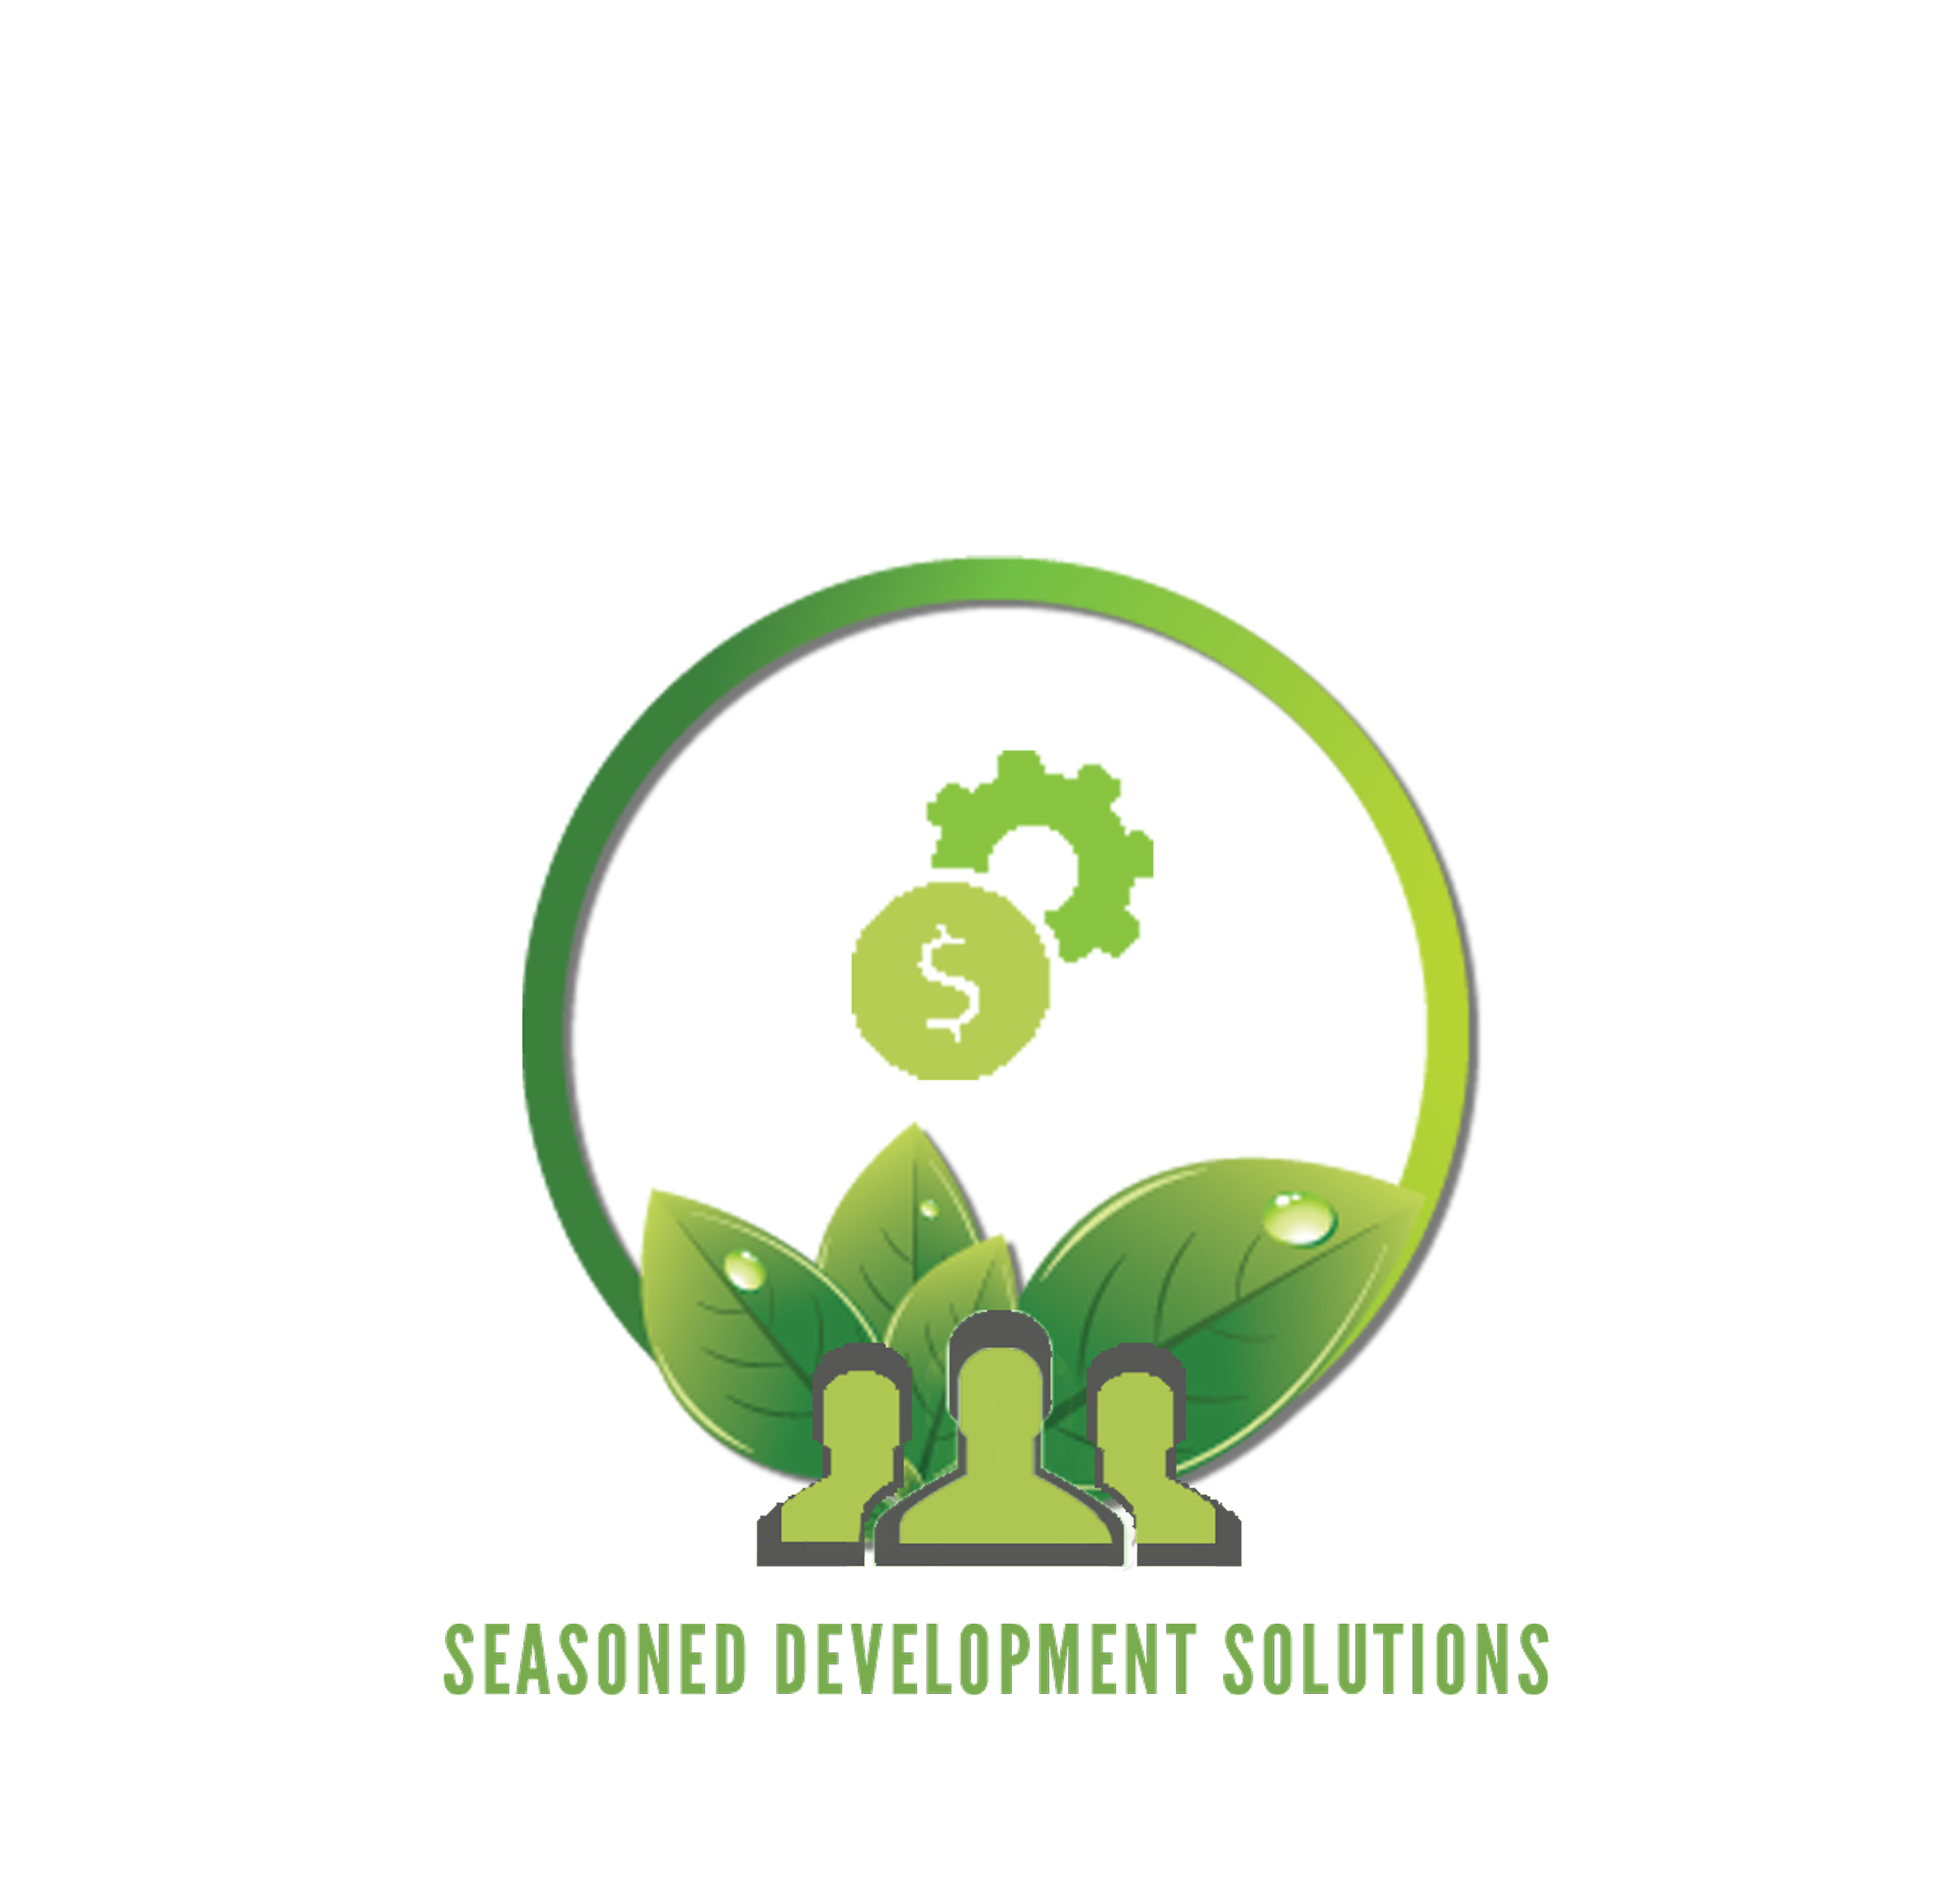 More about Seasoned Development Solutions